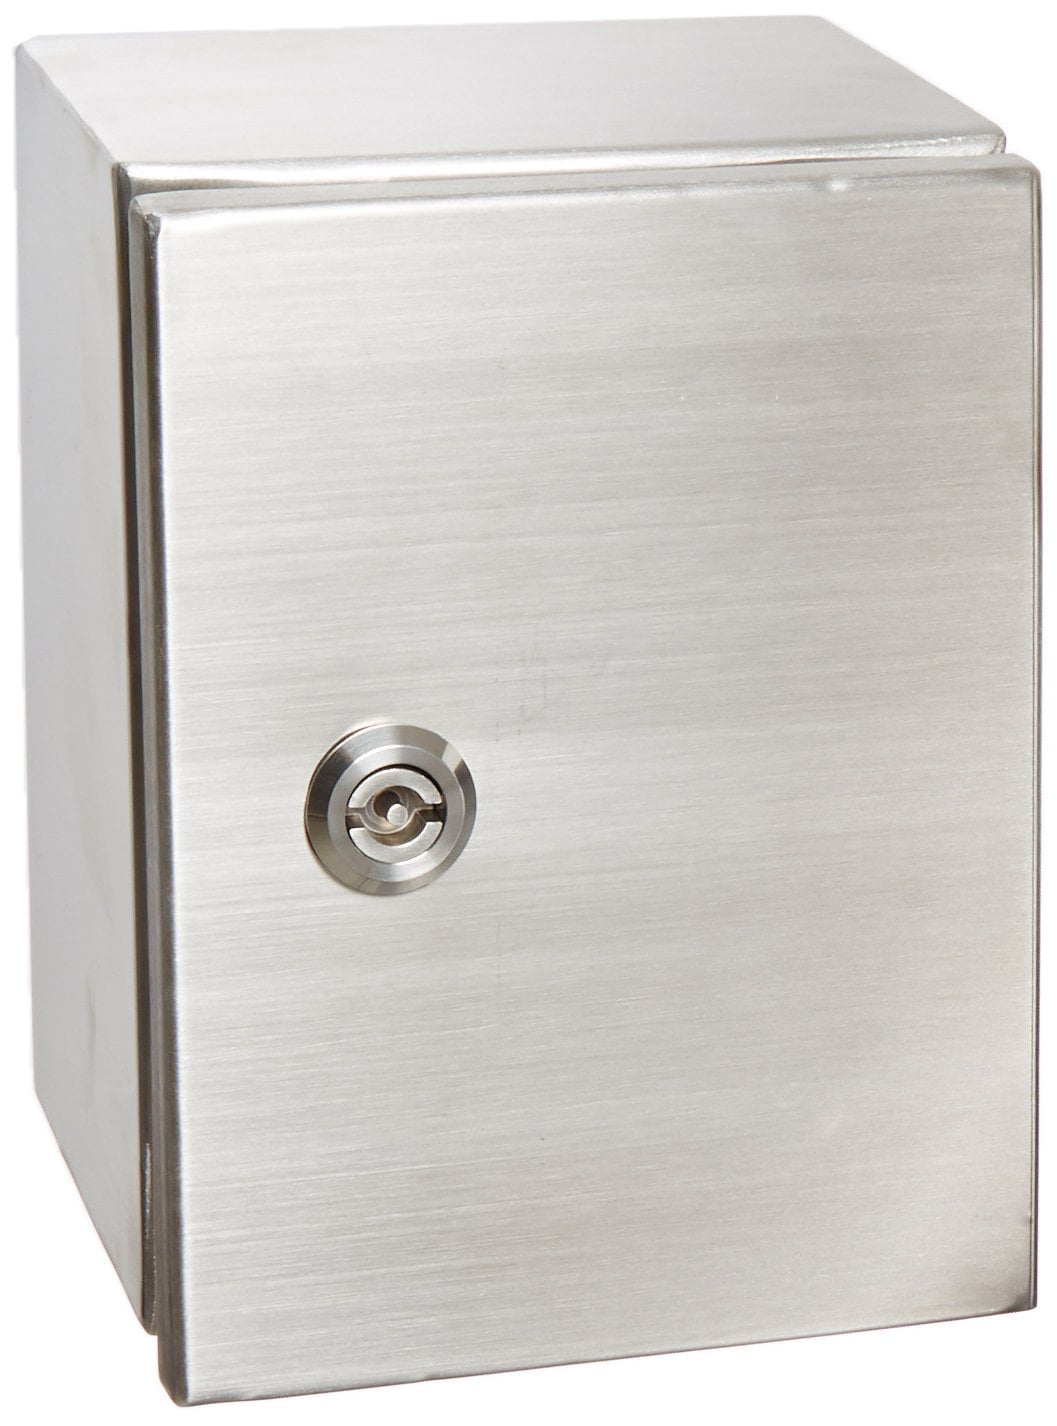 11-51/64 Width x 11-51/64 Height x 5-29/32 Depth Natural Finish BUD Industries Series SNB NEMA 4 Stainless Steel Box with Mounting Bracket 